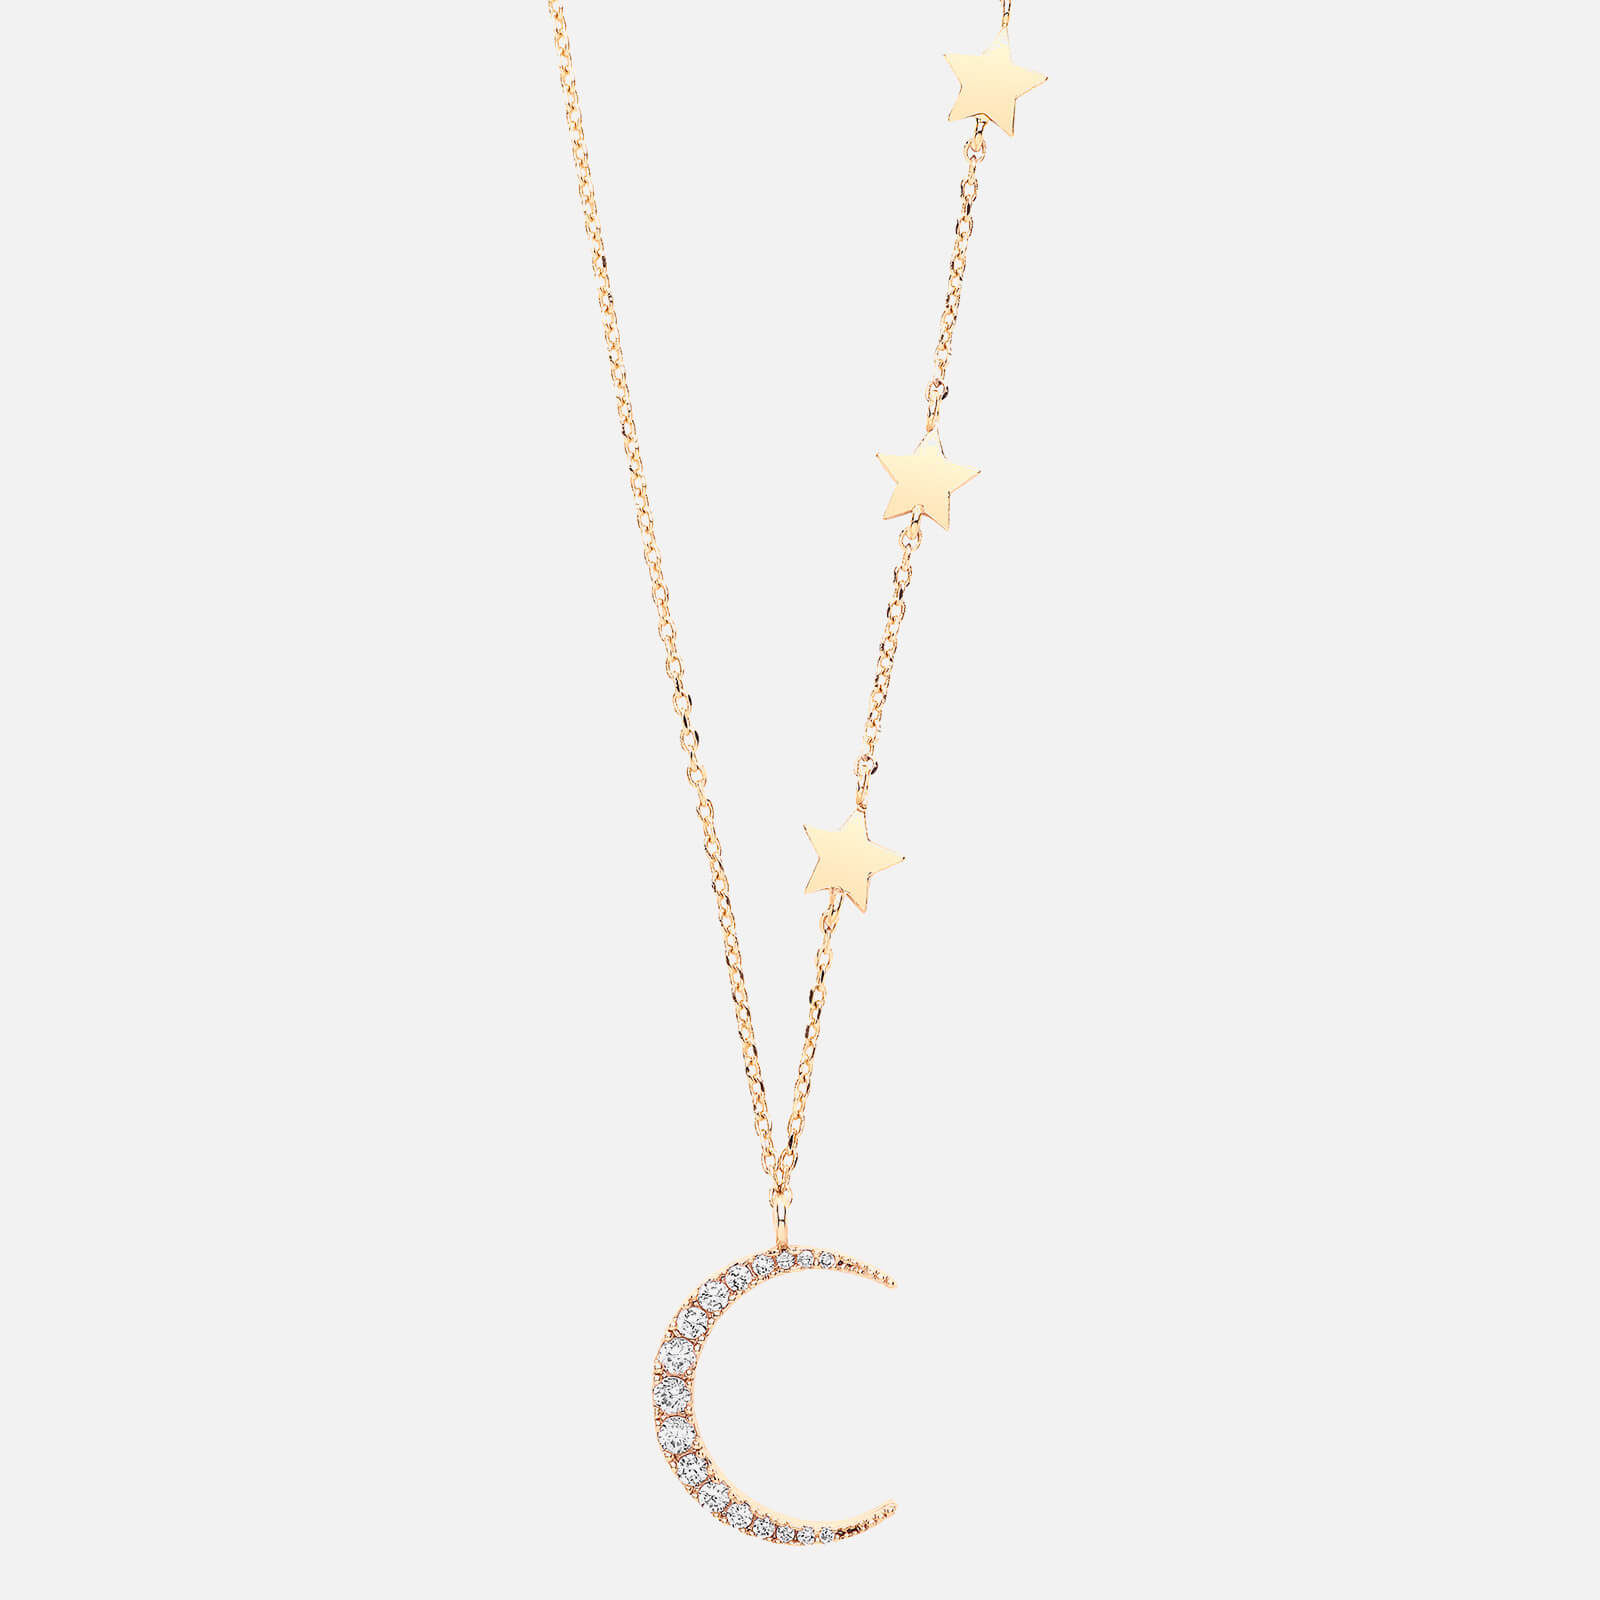 Estella Bartlett Women's Statement Moon and Stars Necklace - Gold Plated